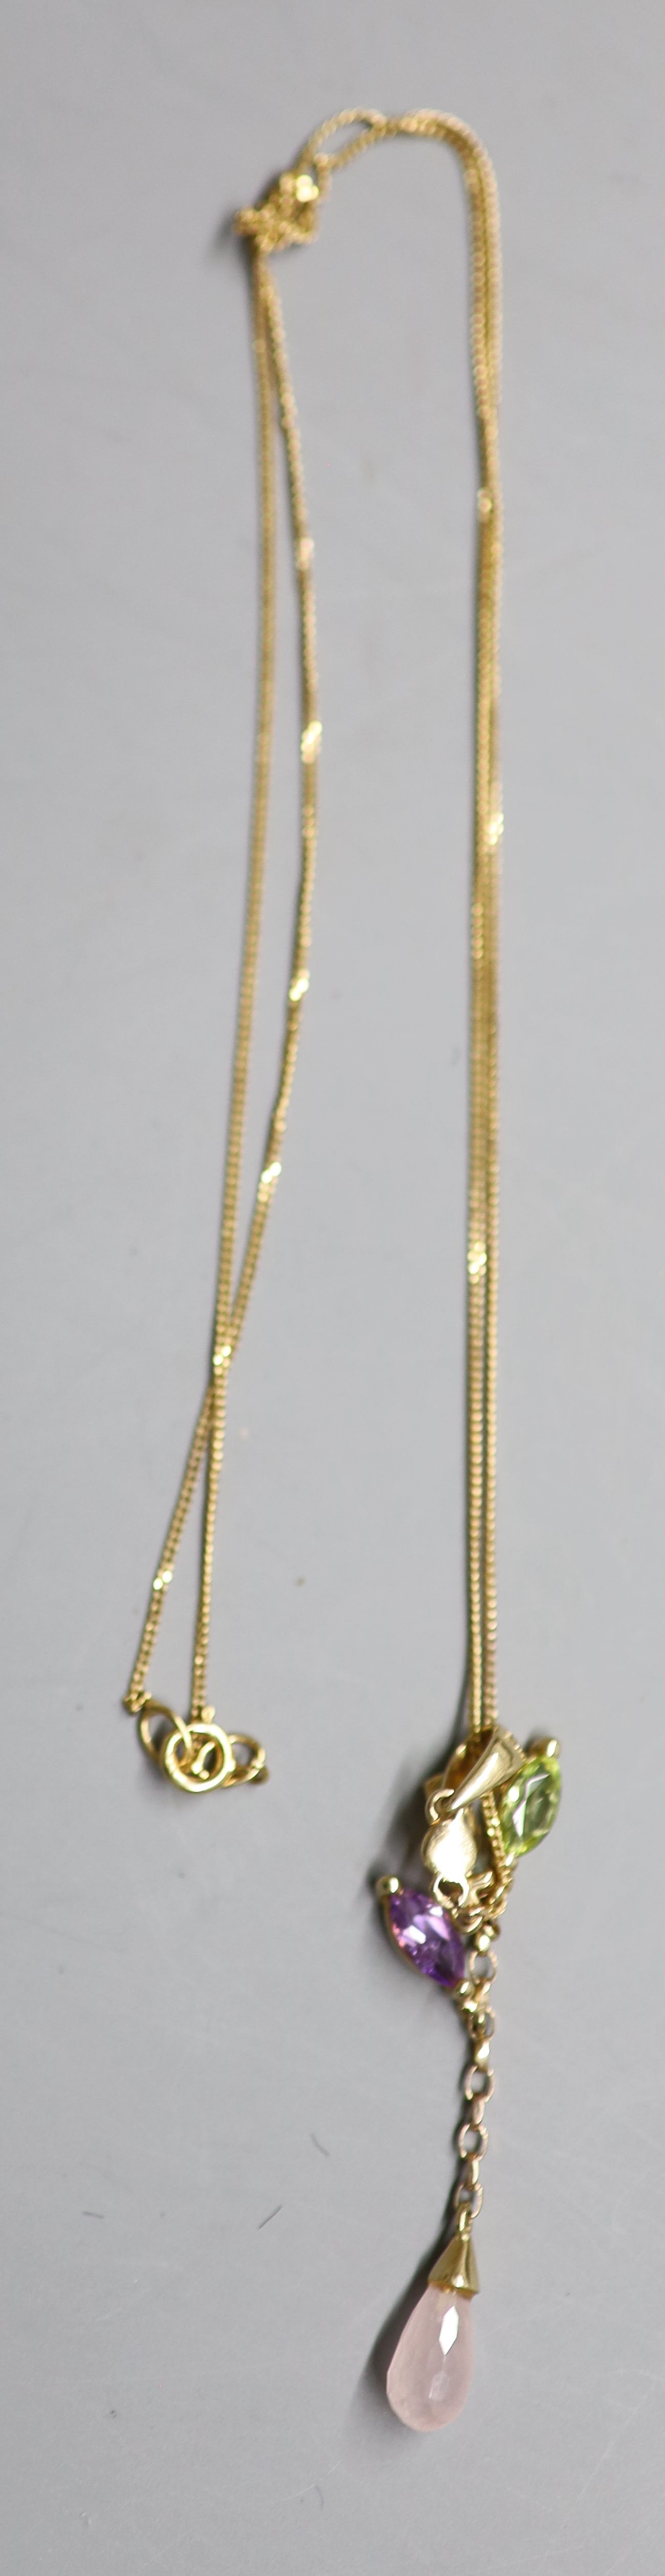 A modern 9ct gold and multi gem set drop pendant, 38mm, on a 9ct gold fine link chain (knotted), gross 1.7 grams.